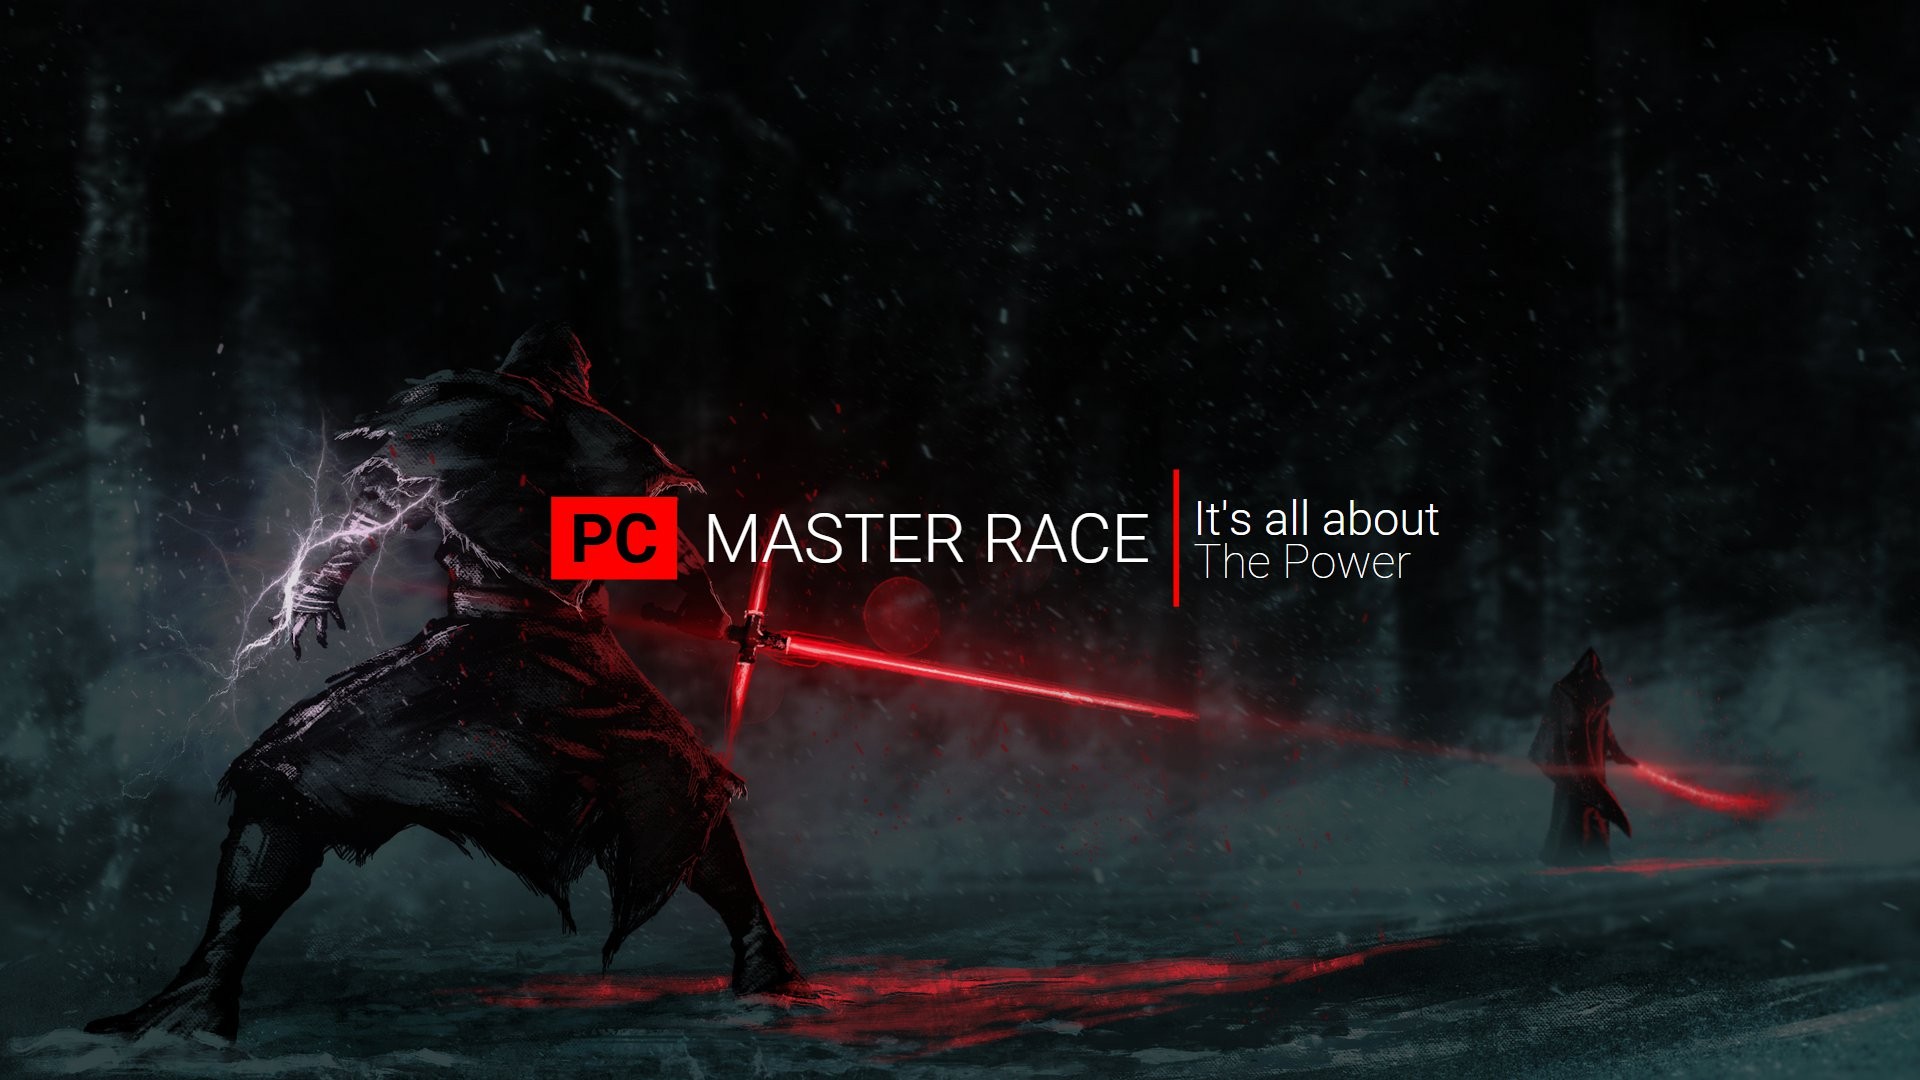 PC Gaming Master Race Sith 1920x1080